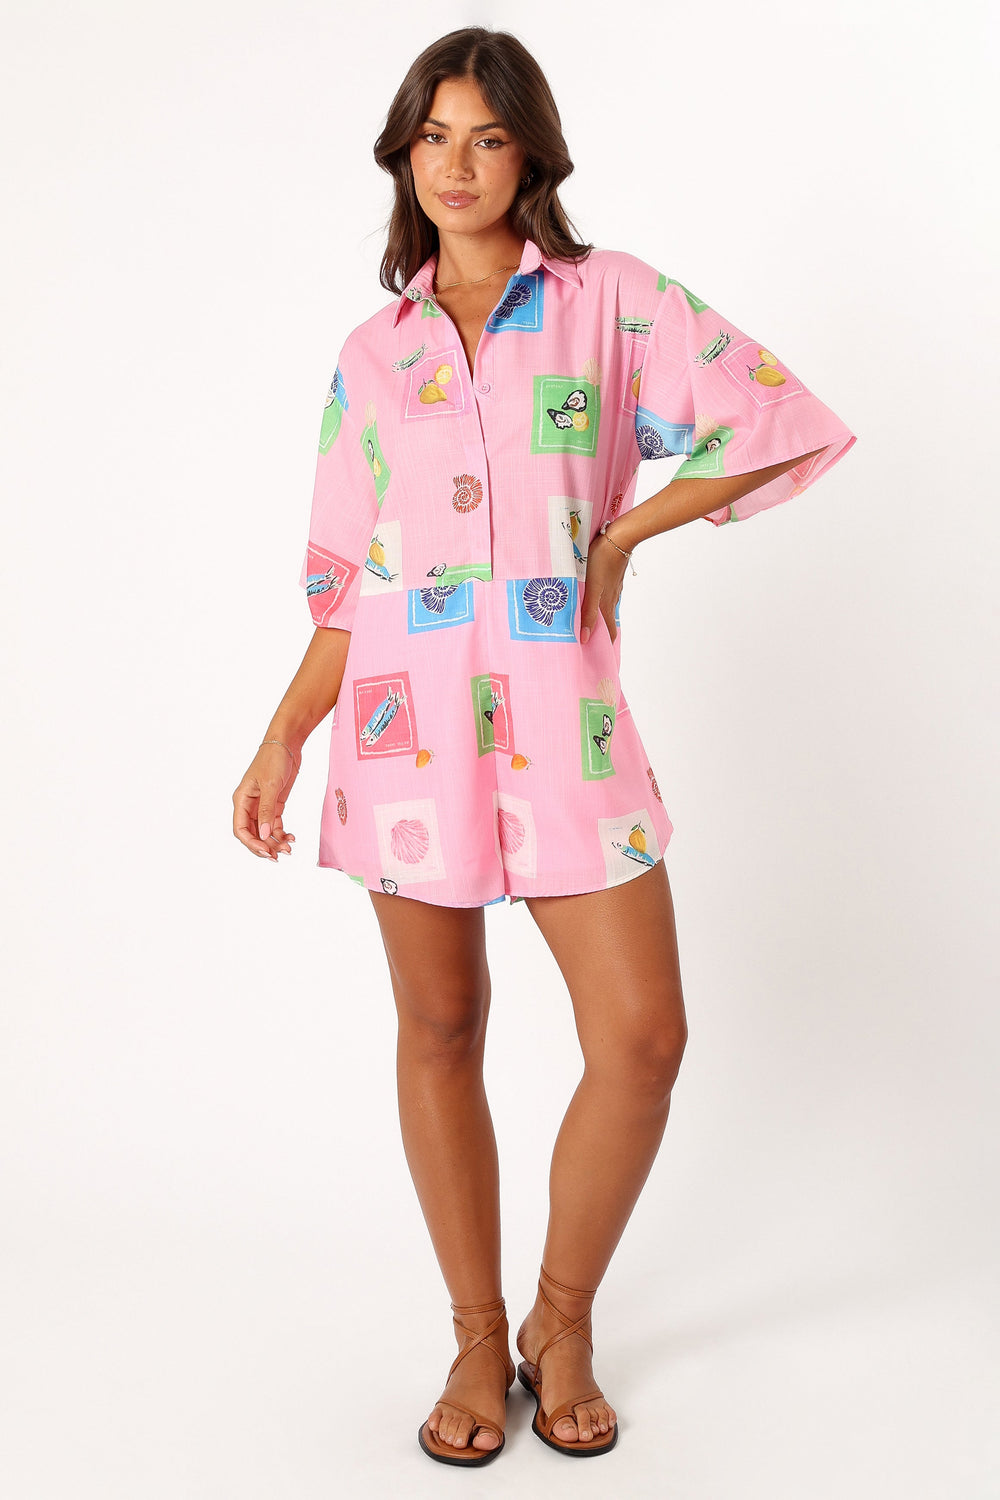 PLAYSUITS @Kellie Playsuit - Pink Stamp Print (Hold for Sundial)